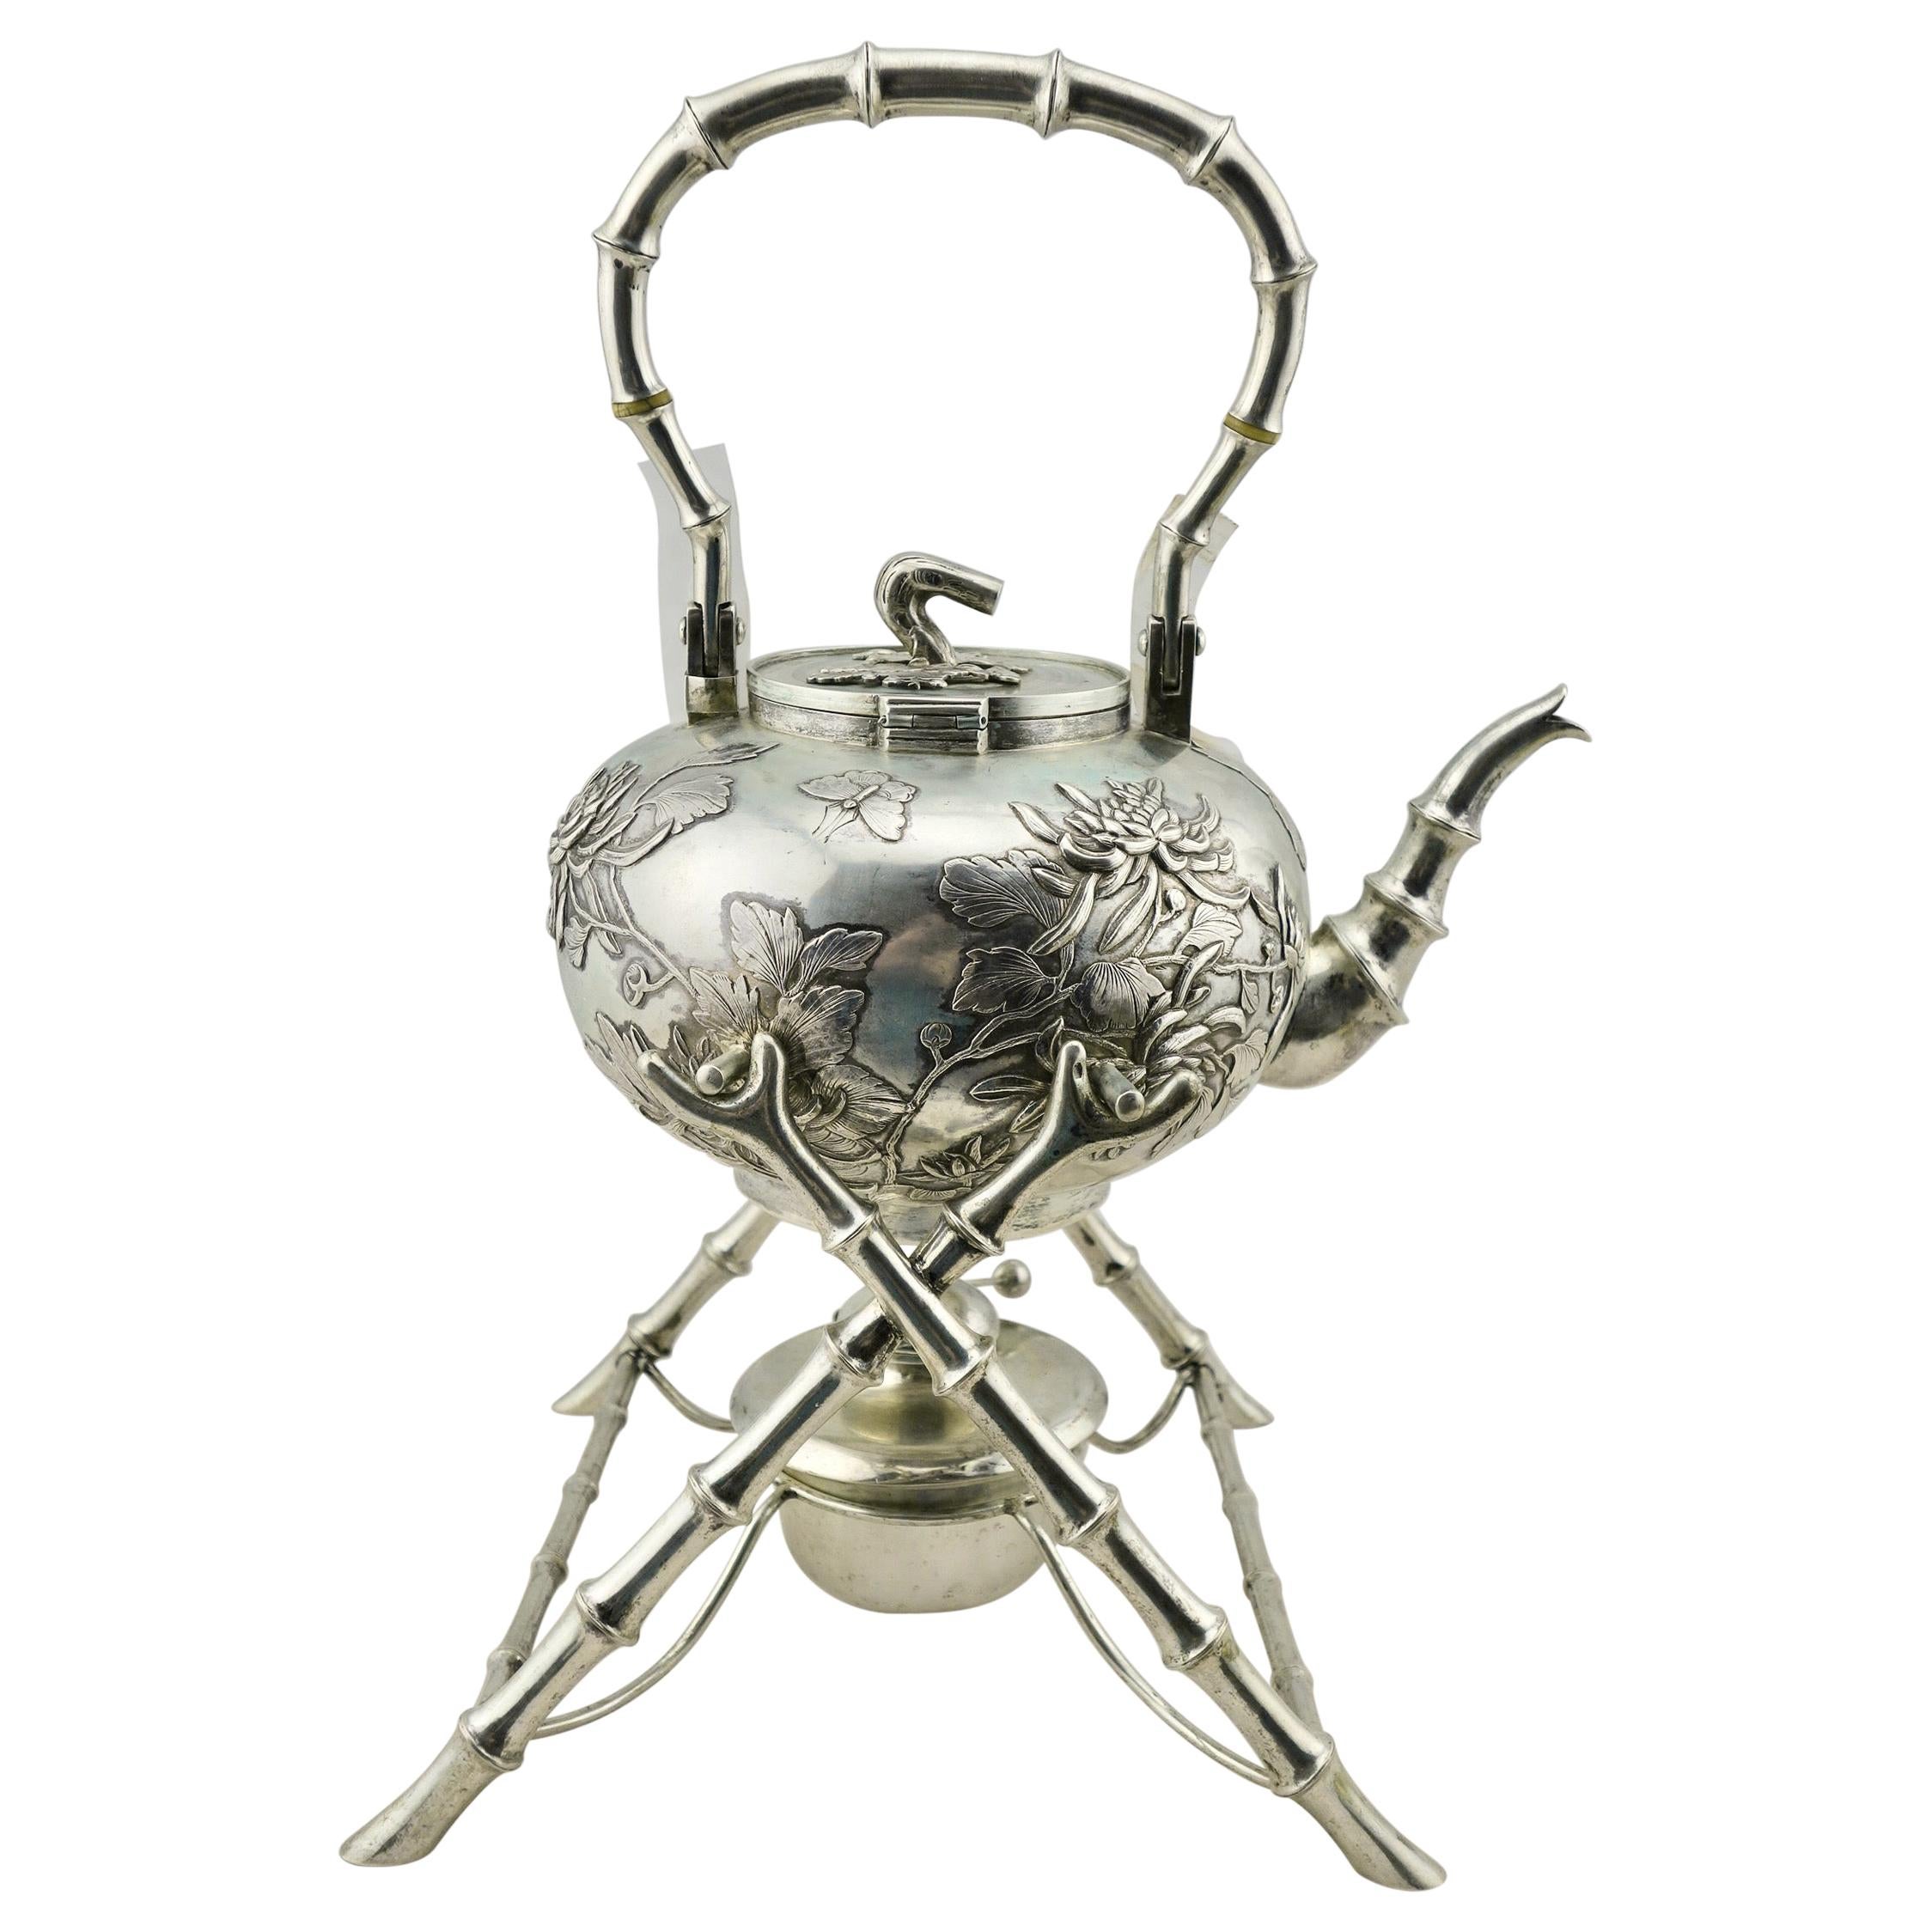 Chinese Export Silver Teapot or Kettle on a Stand by Leeching, circa 1900 For Sale